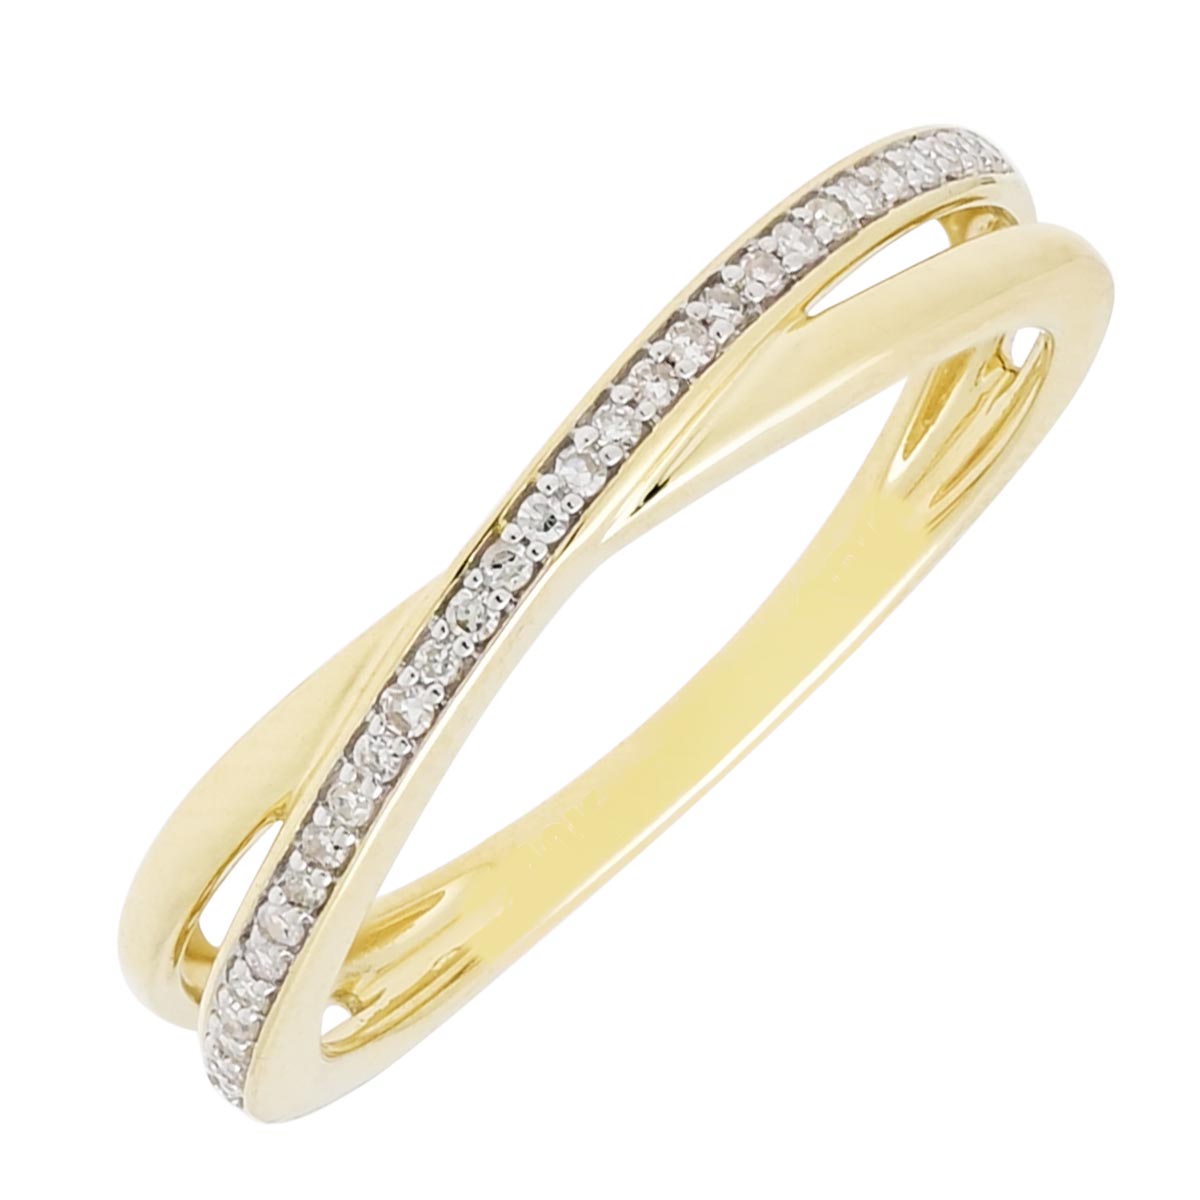 Diamond Fashion Ring in 10kt Yellow Gold (1/10ct tw)